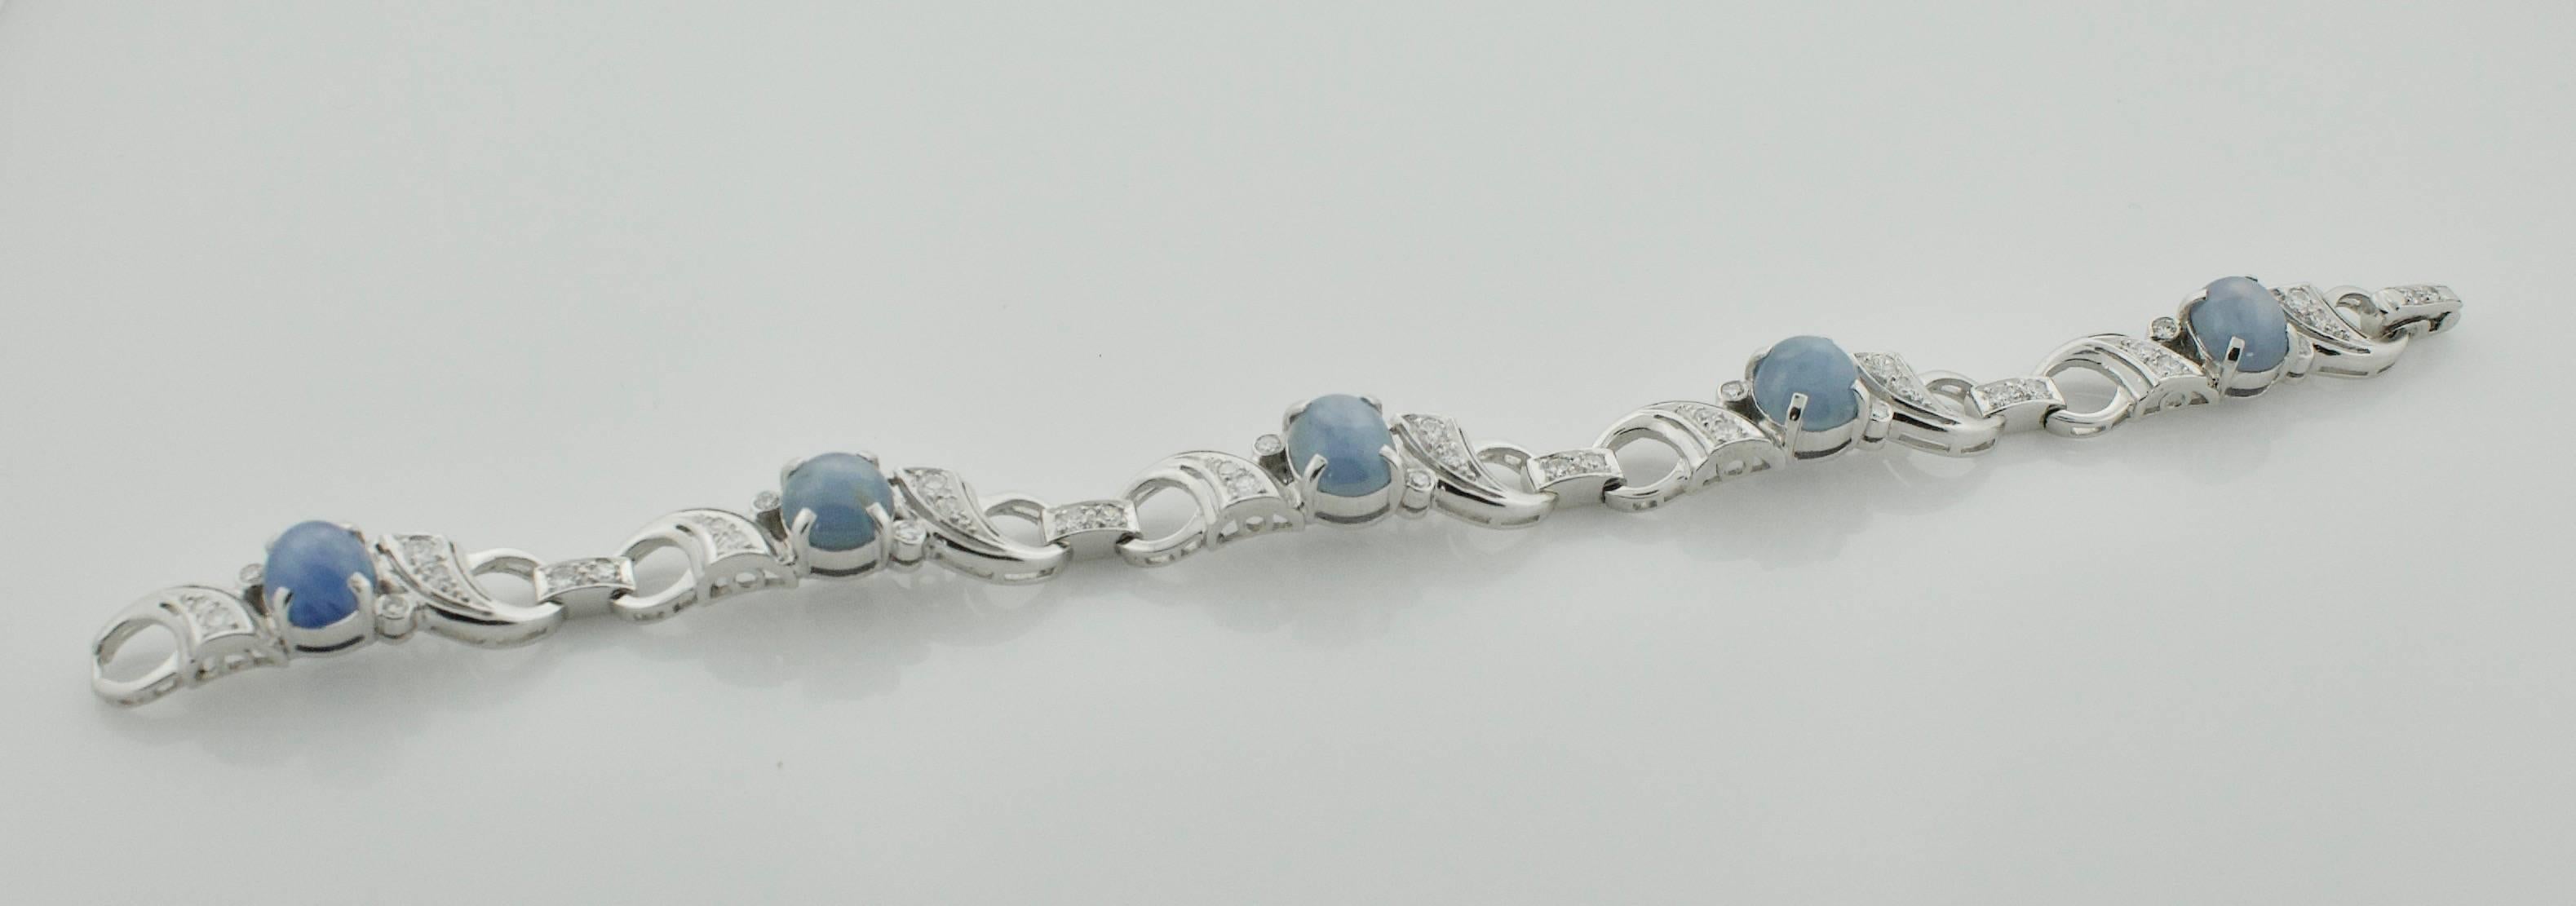 Plat. Star Sapphire and Diamond Bracelet  Circa 1940's 18.40 carats in Sapphires
Five Cabochon Star Sapphires weighing 18.50 carats approximately  [Very Strong Stars, The Top Picture is in Sunlight but does not accurately represent their